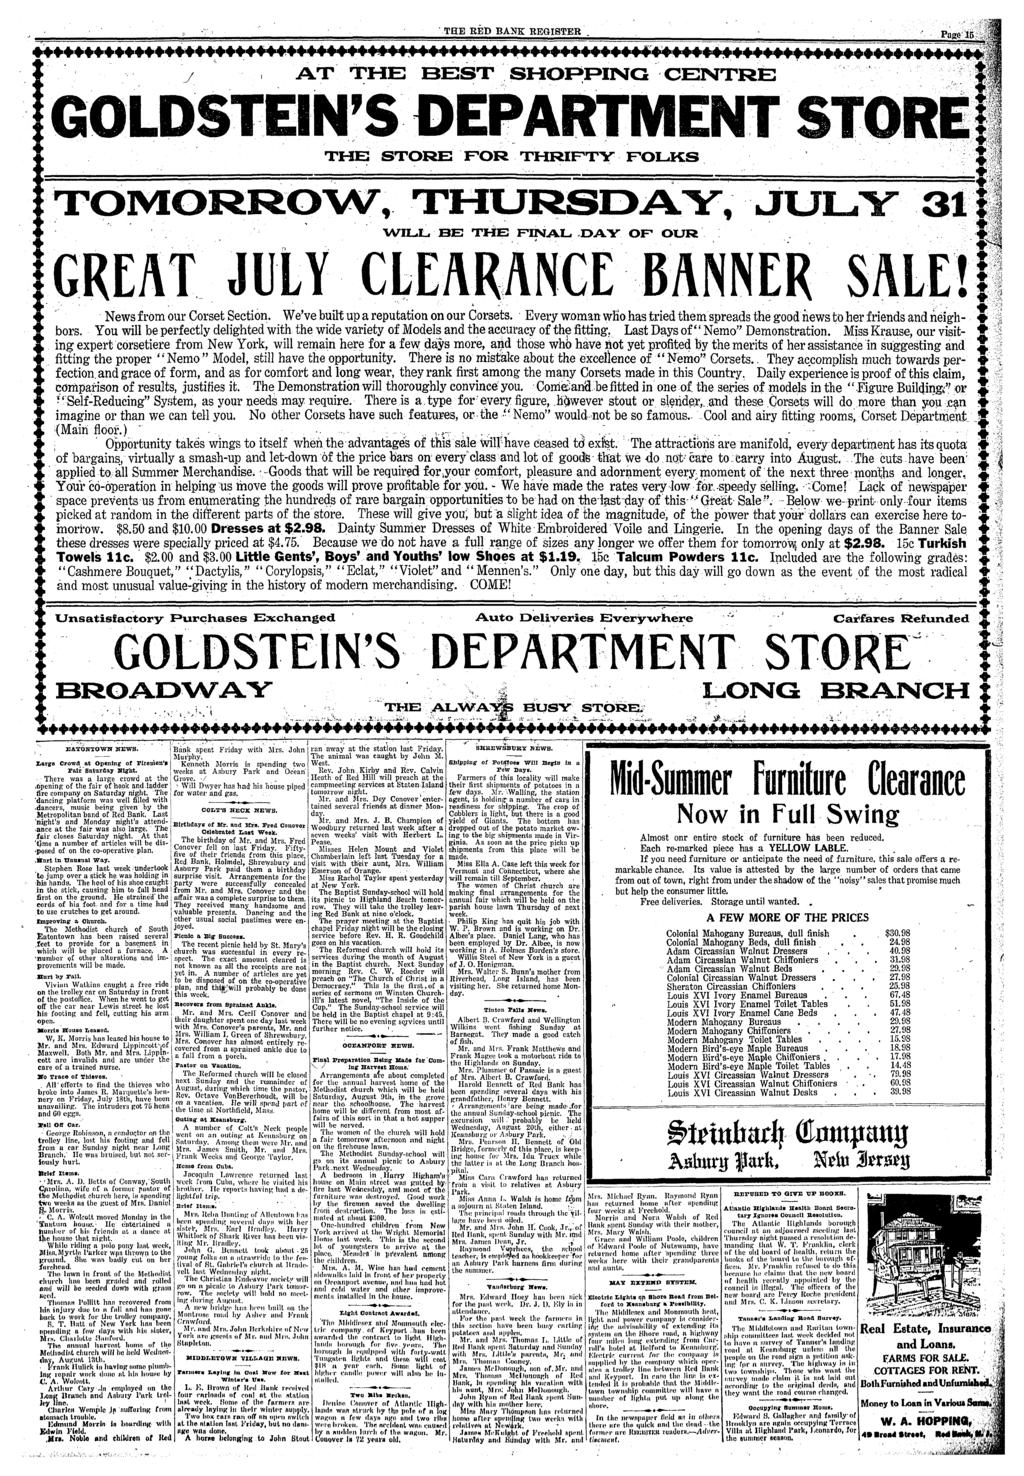 THE BED BANK REGSTER P.HM 1R AT THE GEST SHOPPNG CENT GOLDSTEN'S DEPARTMENT STORE THE STORE FOR THRFT FOLKS T TOMORROW, THURSDA, JUL 31: WLL, BE THE FNAL, DA OF 1 OUR GREAT JUL CLEARANCE BANNER SALE!